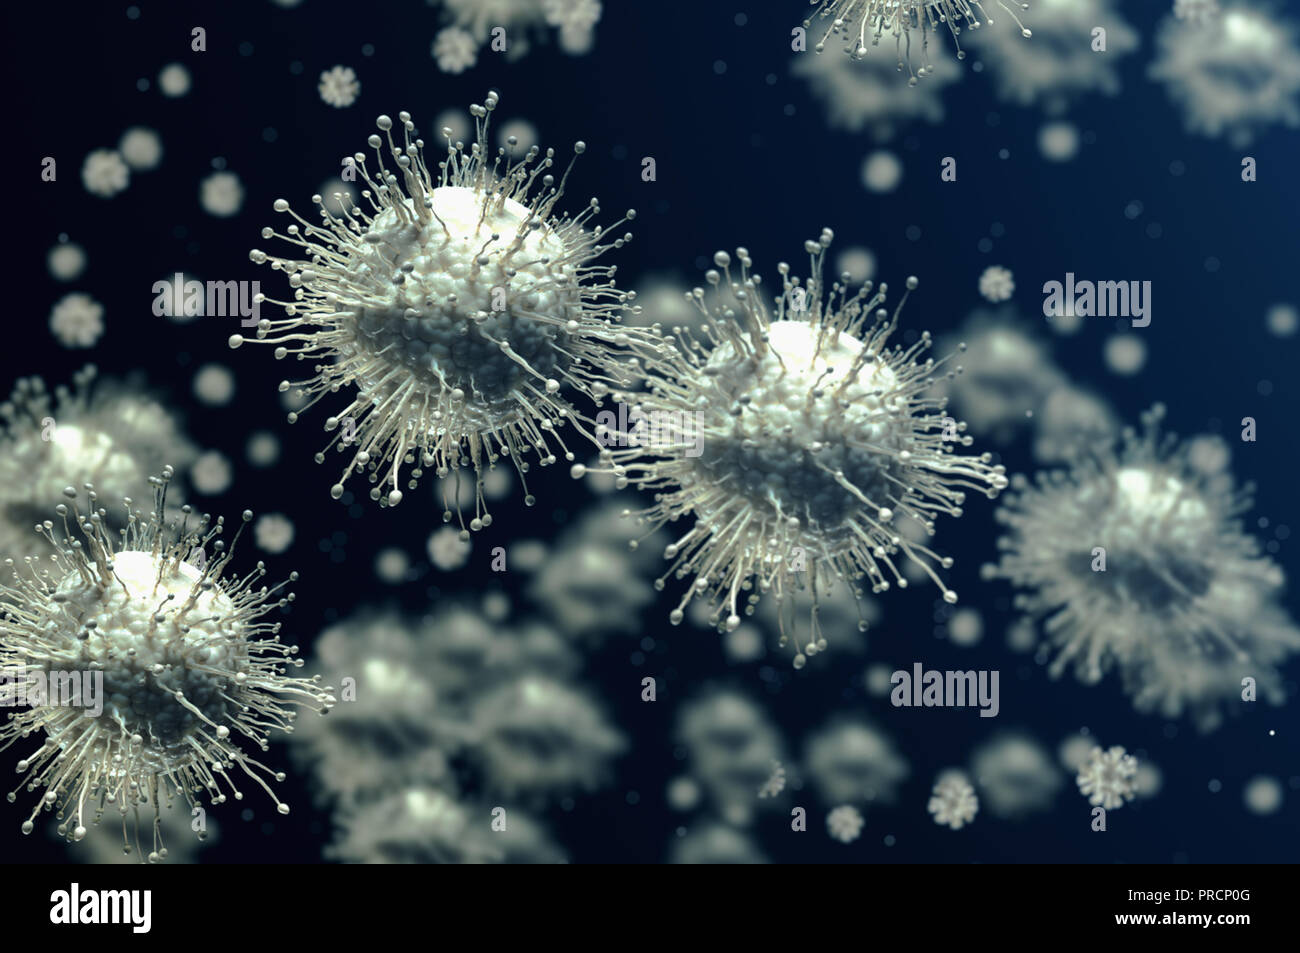 Infected organism sick cells 3d conceptual background with selective focus Stock Photo